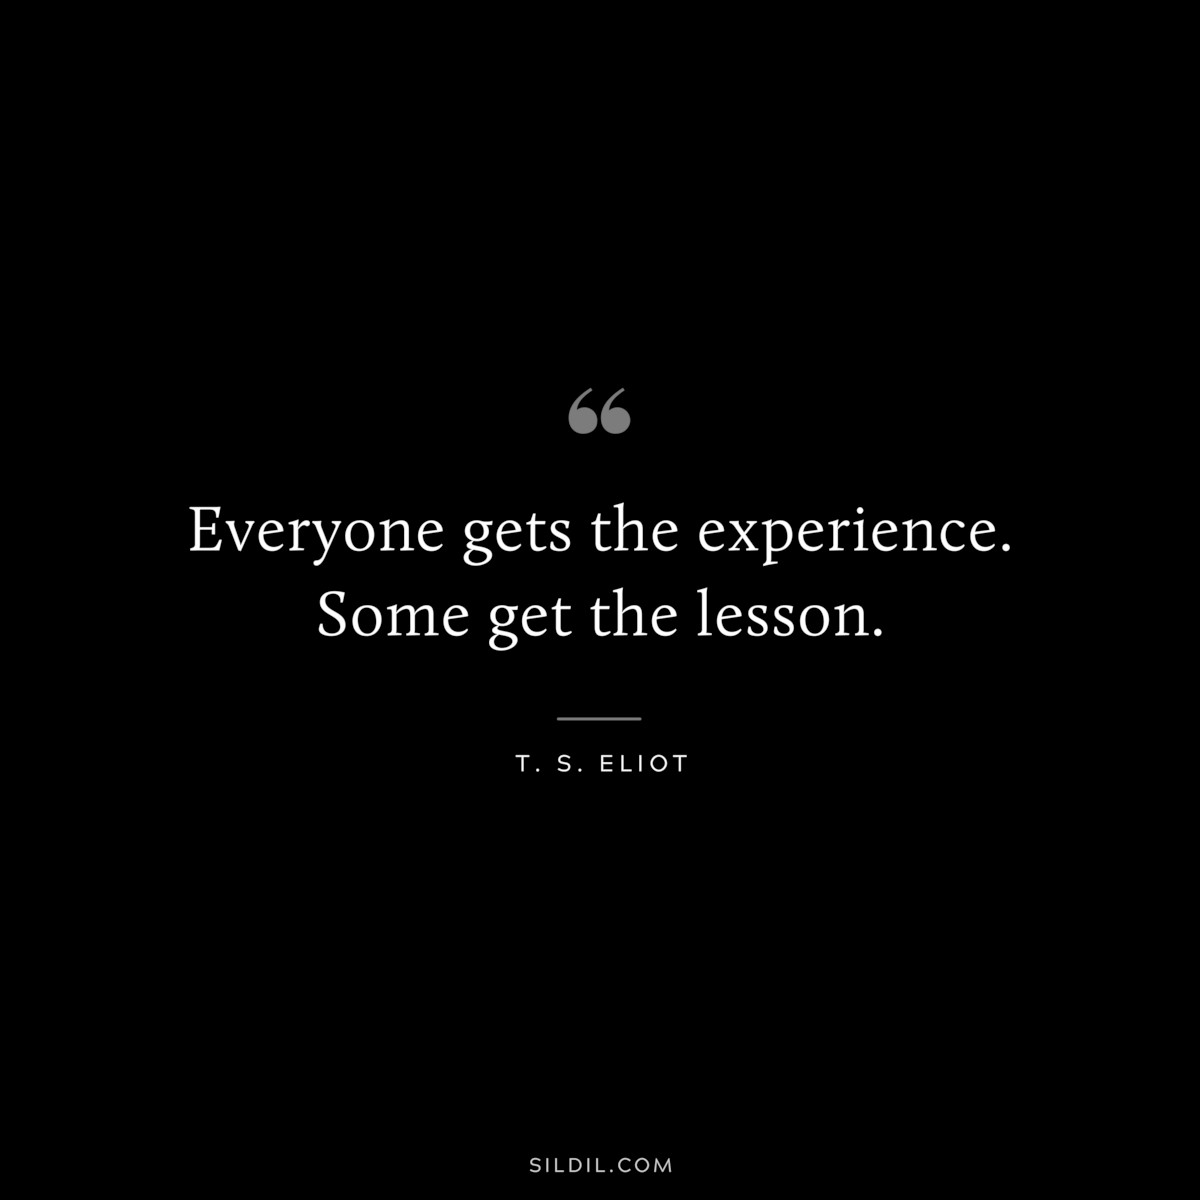 Everyone gets the experience. Some get the lesson. ― T. S. Eliot